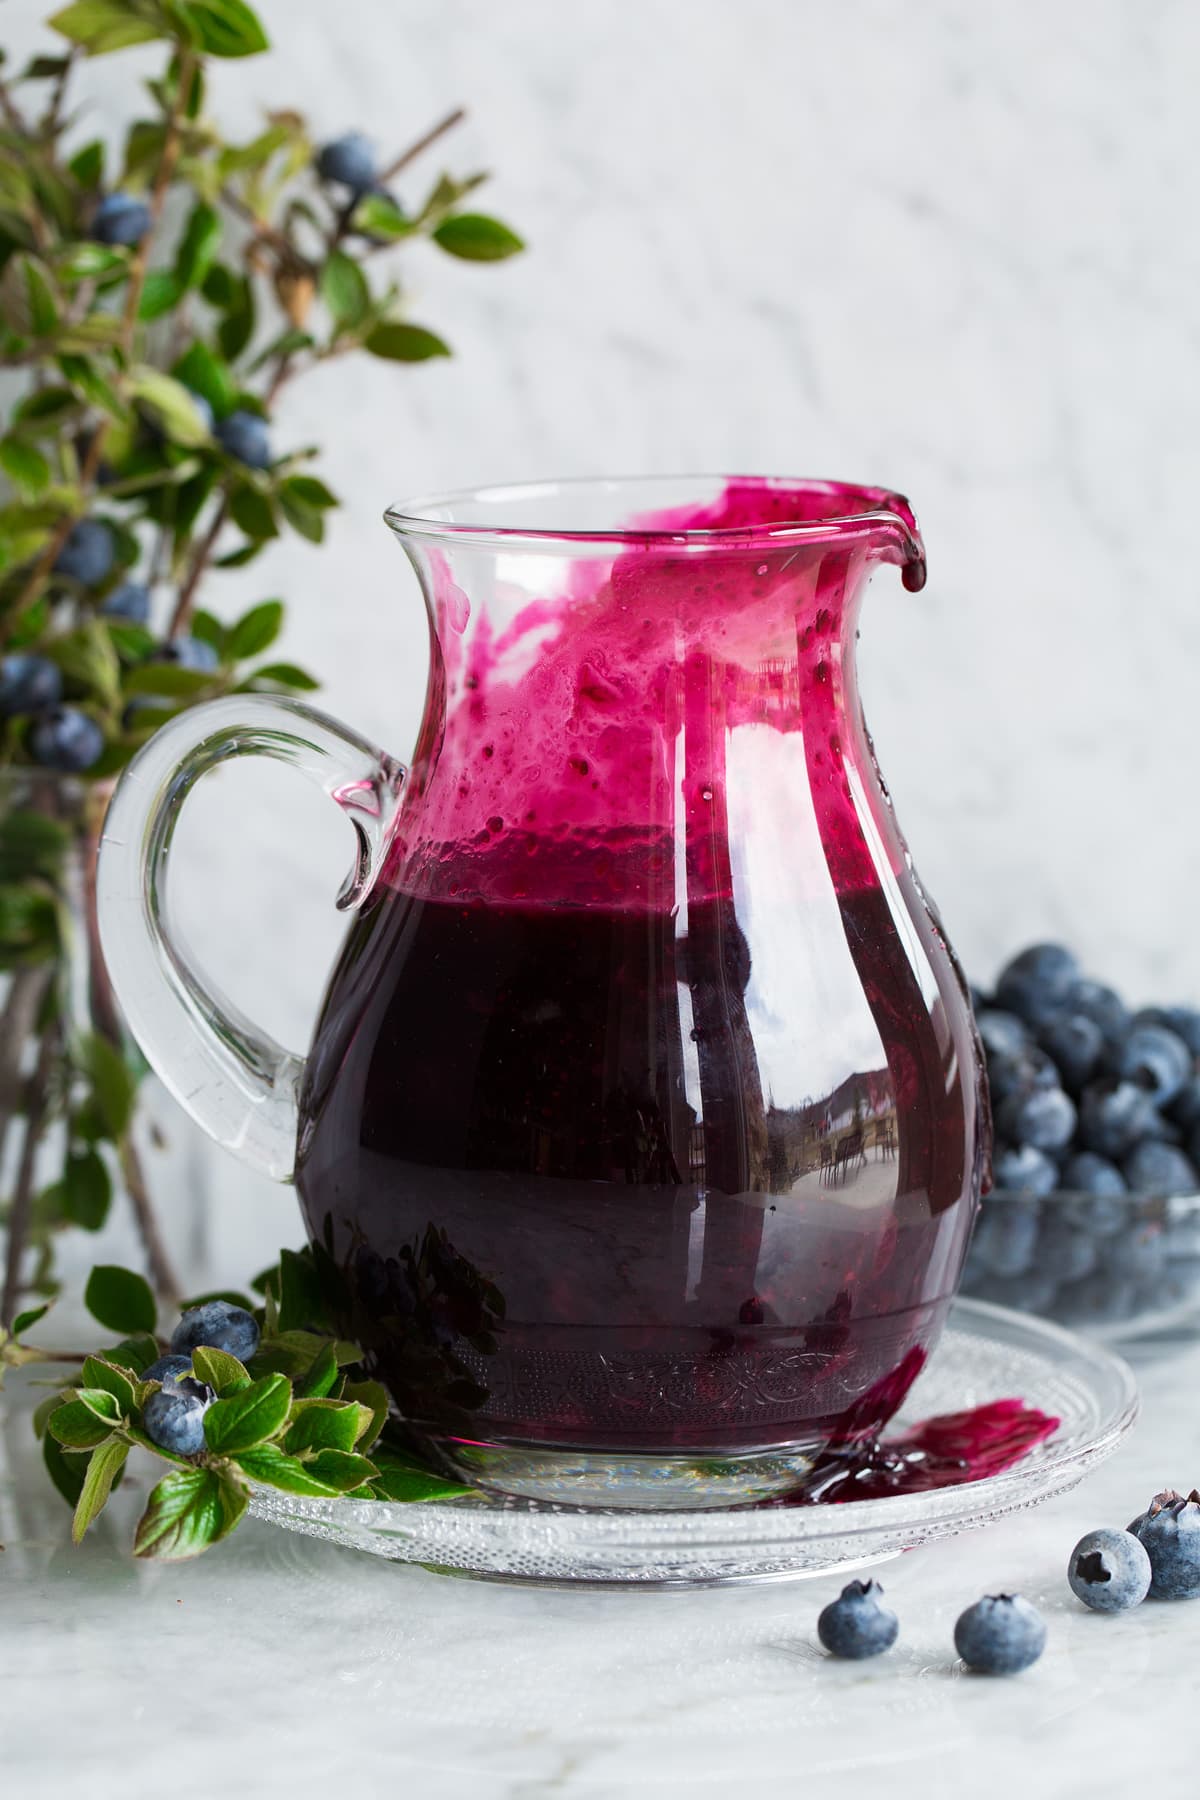 Blueberry syrup in a glass pitcher set over a glass plate.